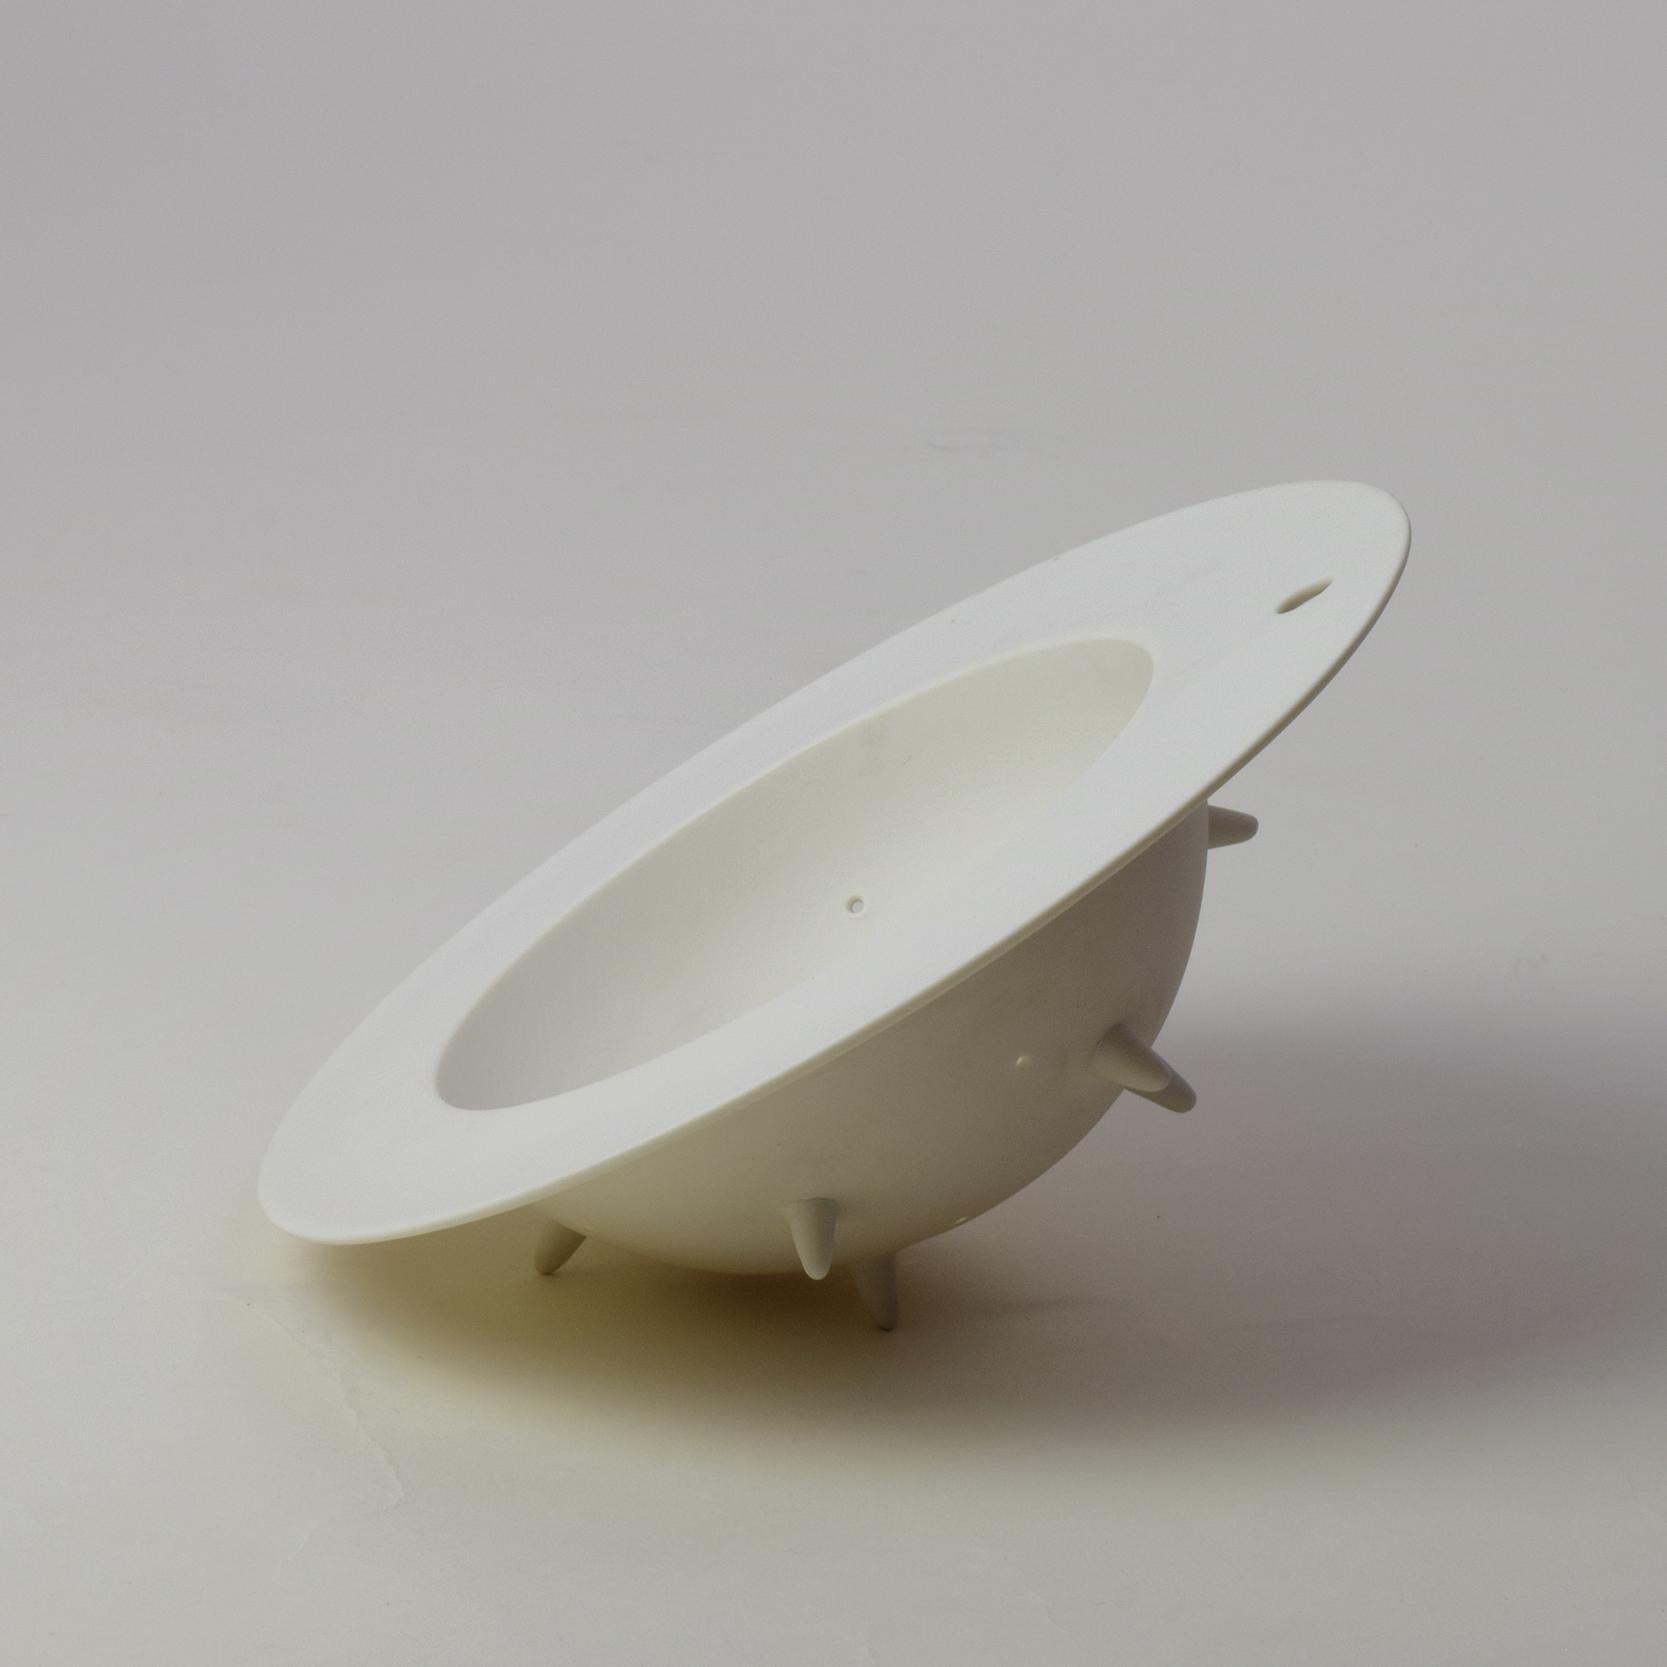 Alison wilding
Ceramic sculpture, 1999
Produced by Royal Doulton, 2000
Porcelain
Imprinted stamp 'AW 2000 Royal Doulton'

A usable table object, or a sculpture to place on a shelf or hang on the wall...

'I don't know if this piece is